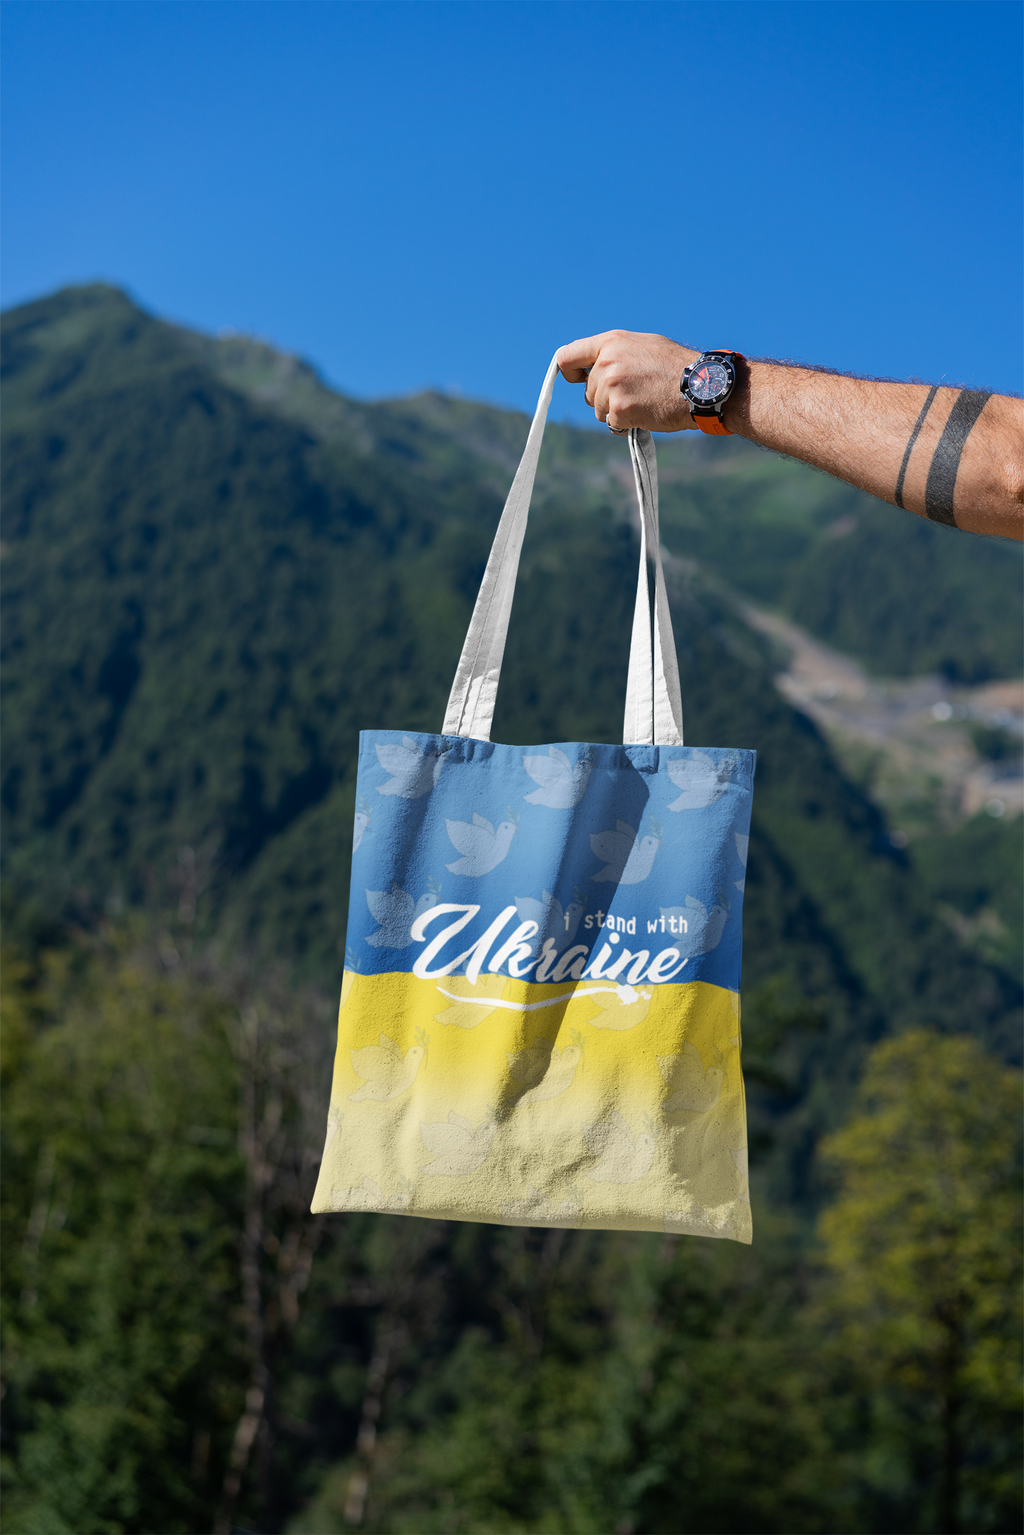 mockup-featuring-a-man-s-hand-holding-a-tote-bag-against-a-natural-scenery-3131-el1 (10).png